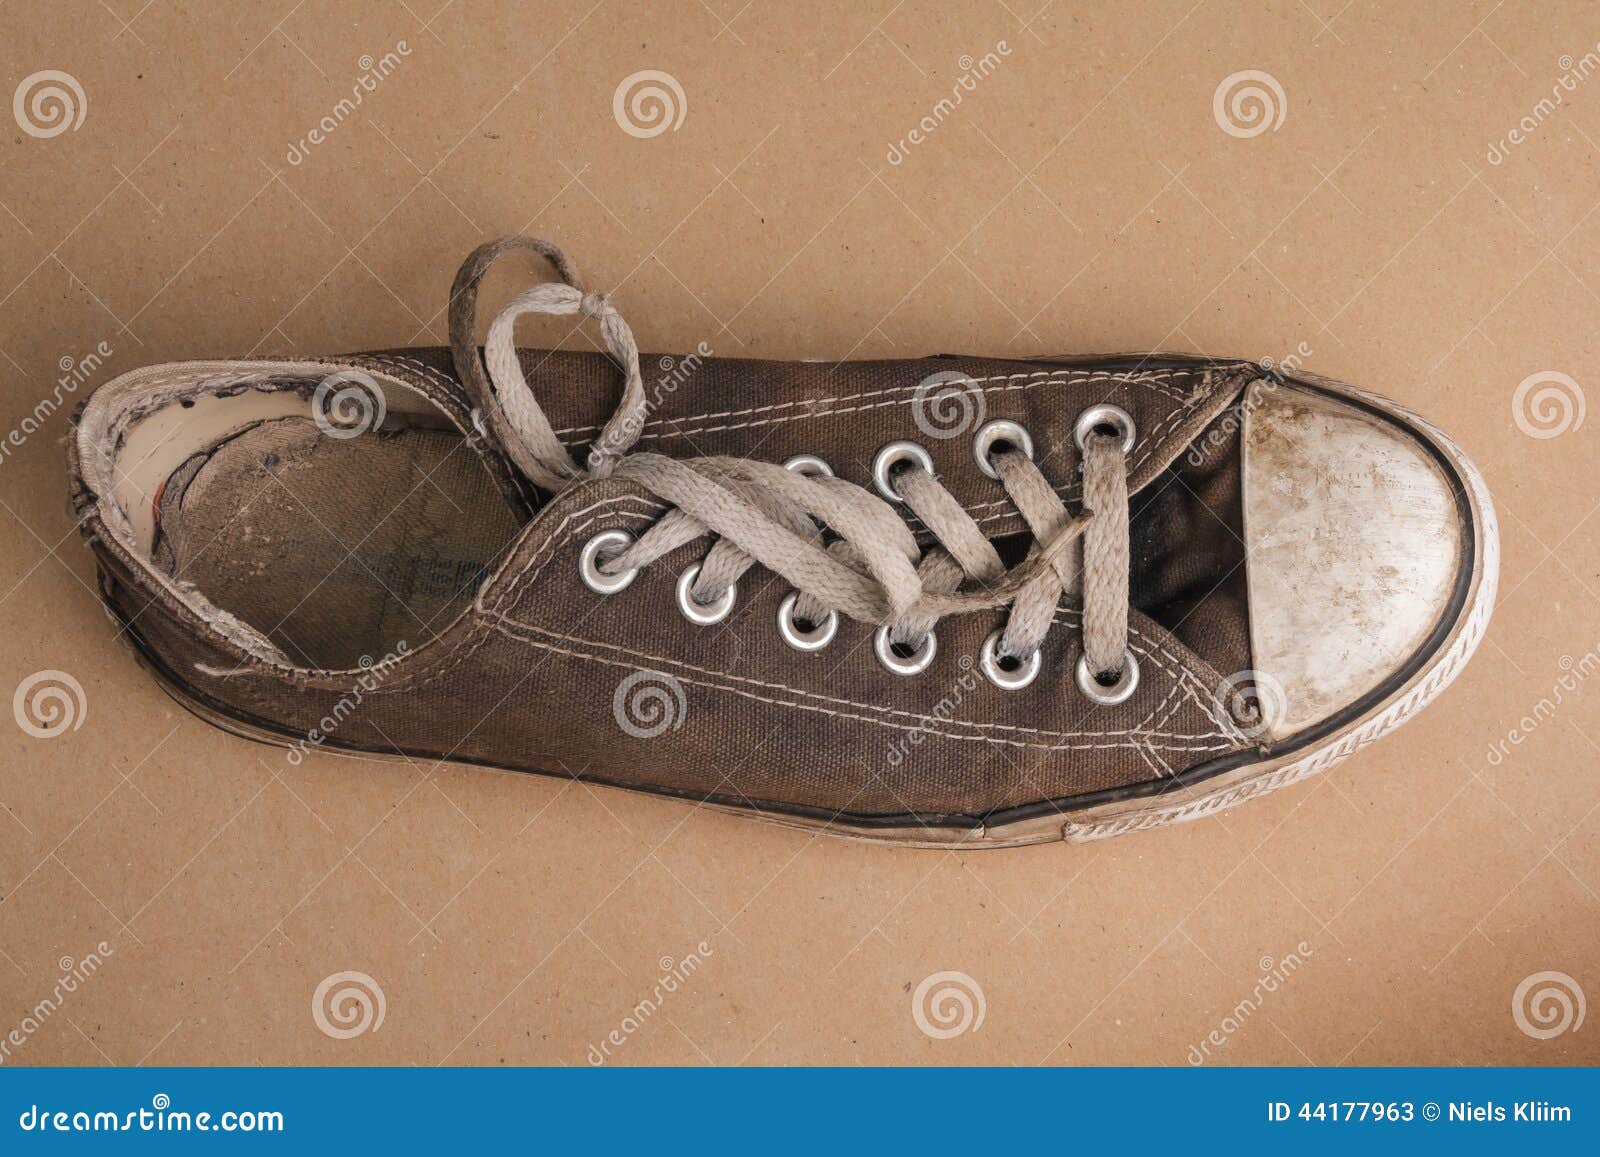 Top View of Old Tennis Shoe Stock Image - Image of rugged, brown: 44177963